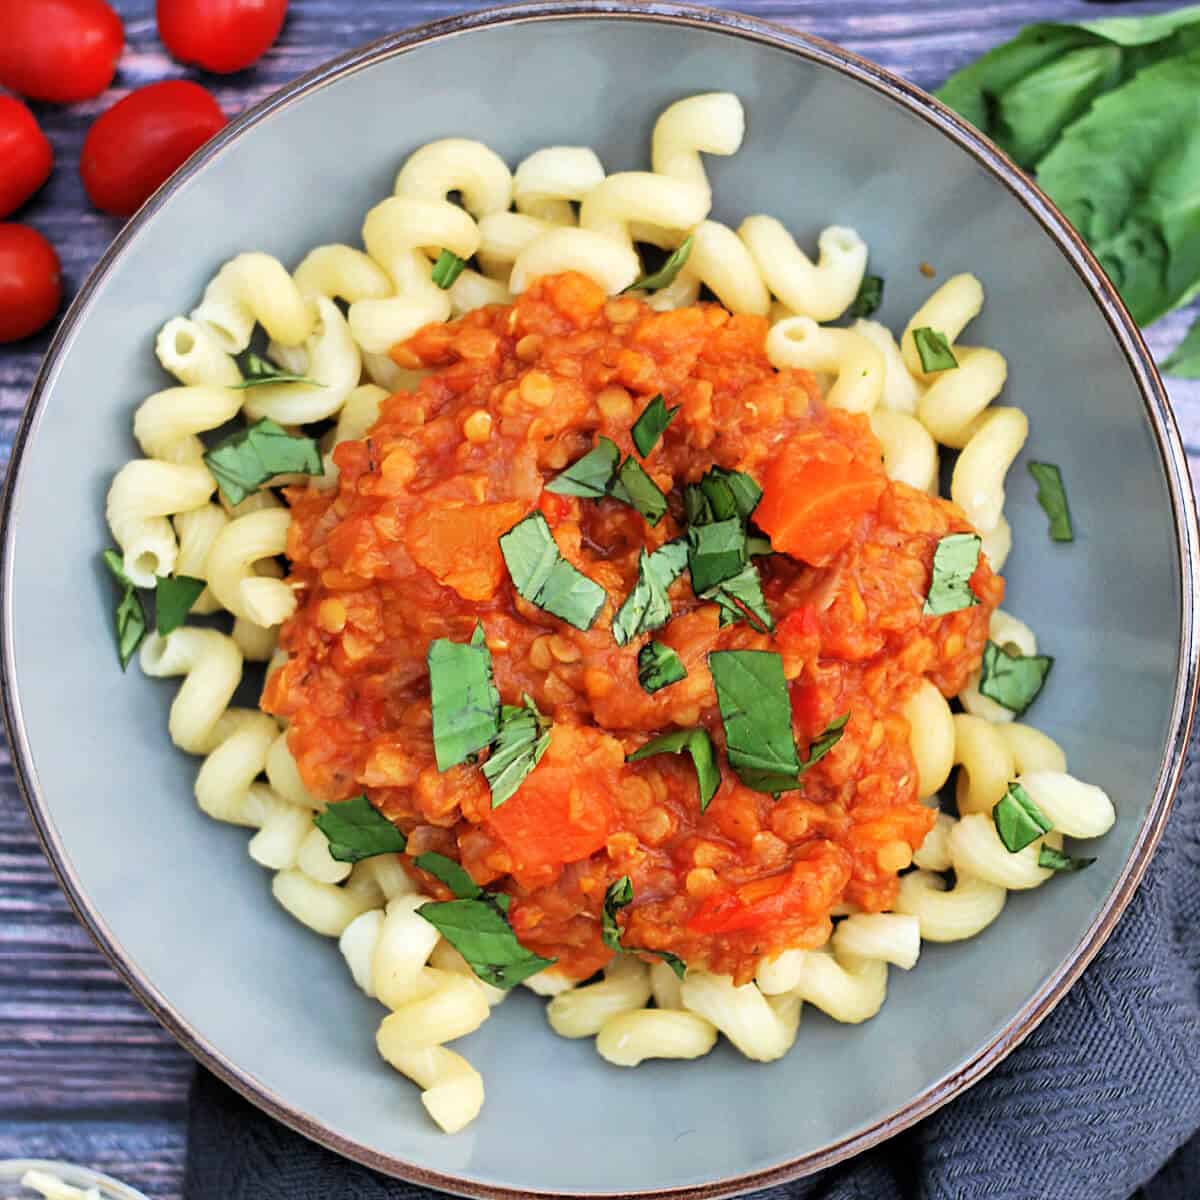 Grey bowl of pasta topped with red lentil bolognese sauce, with basil garnish.